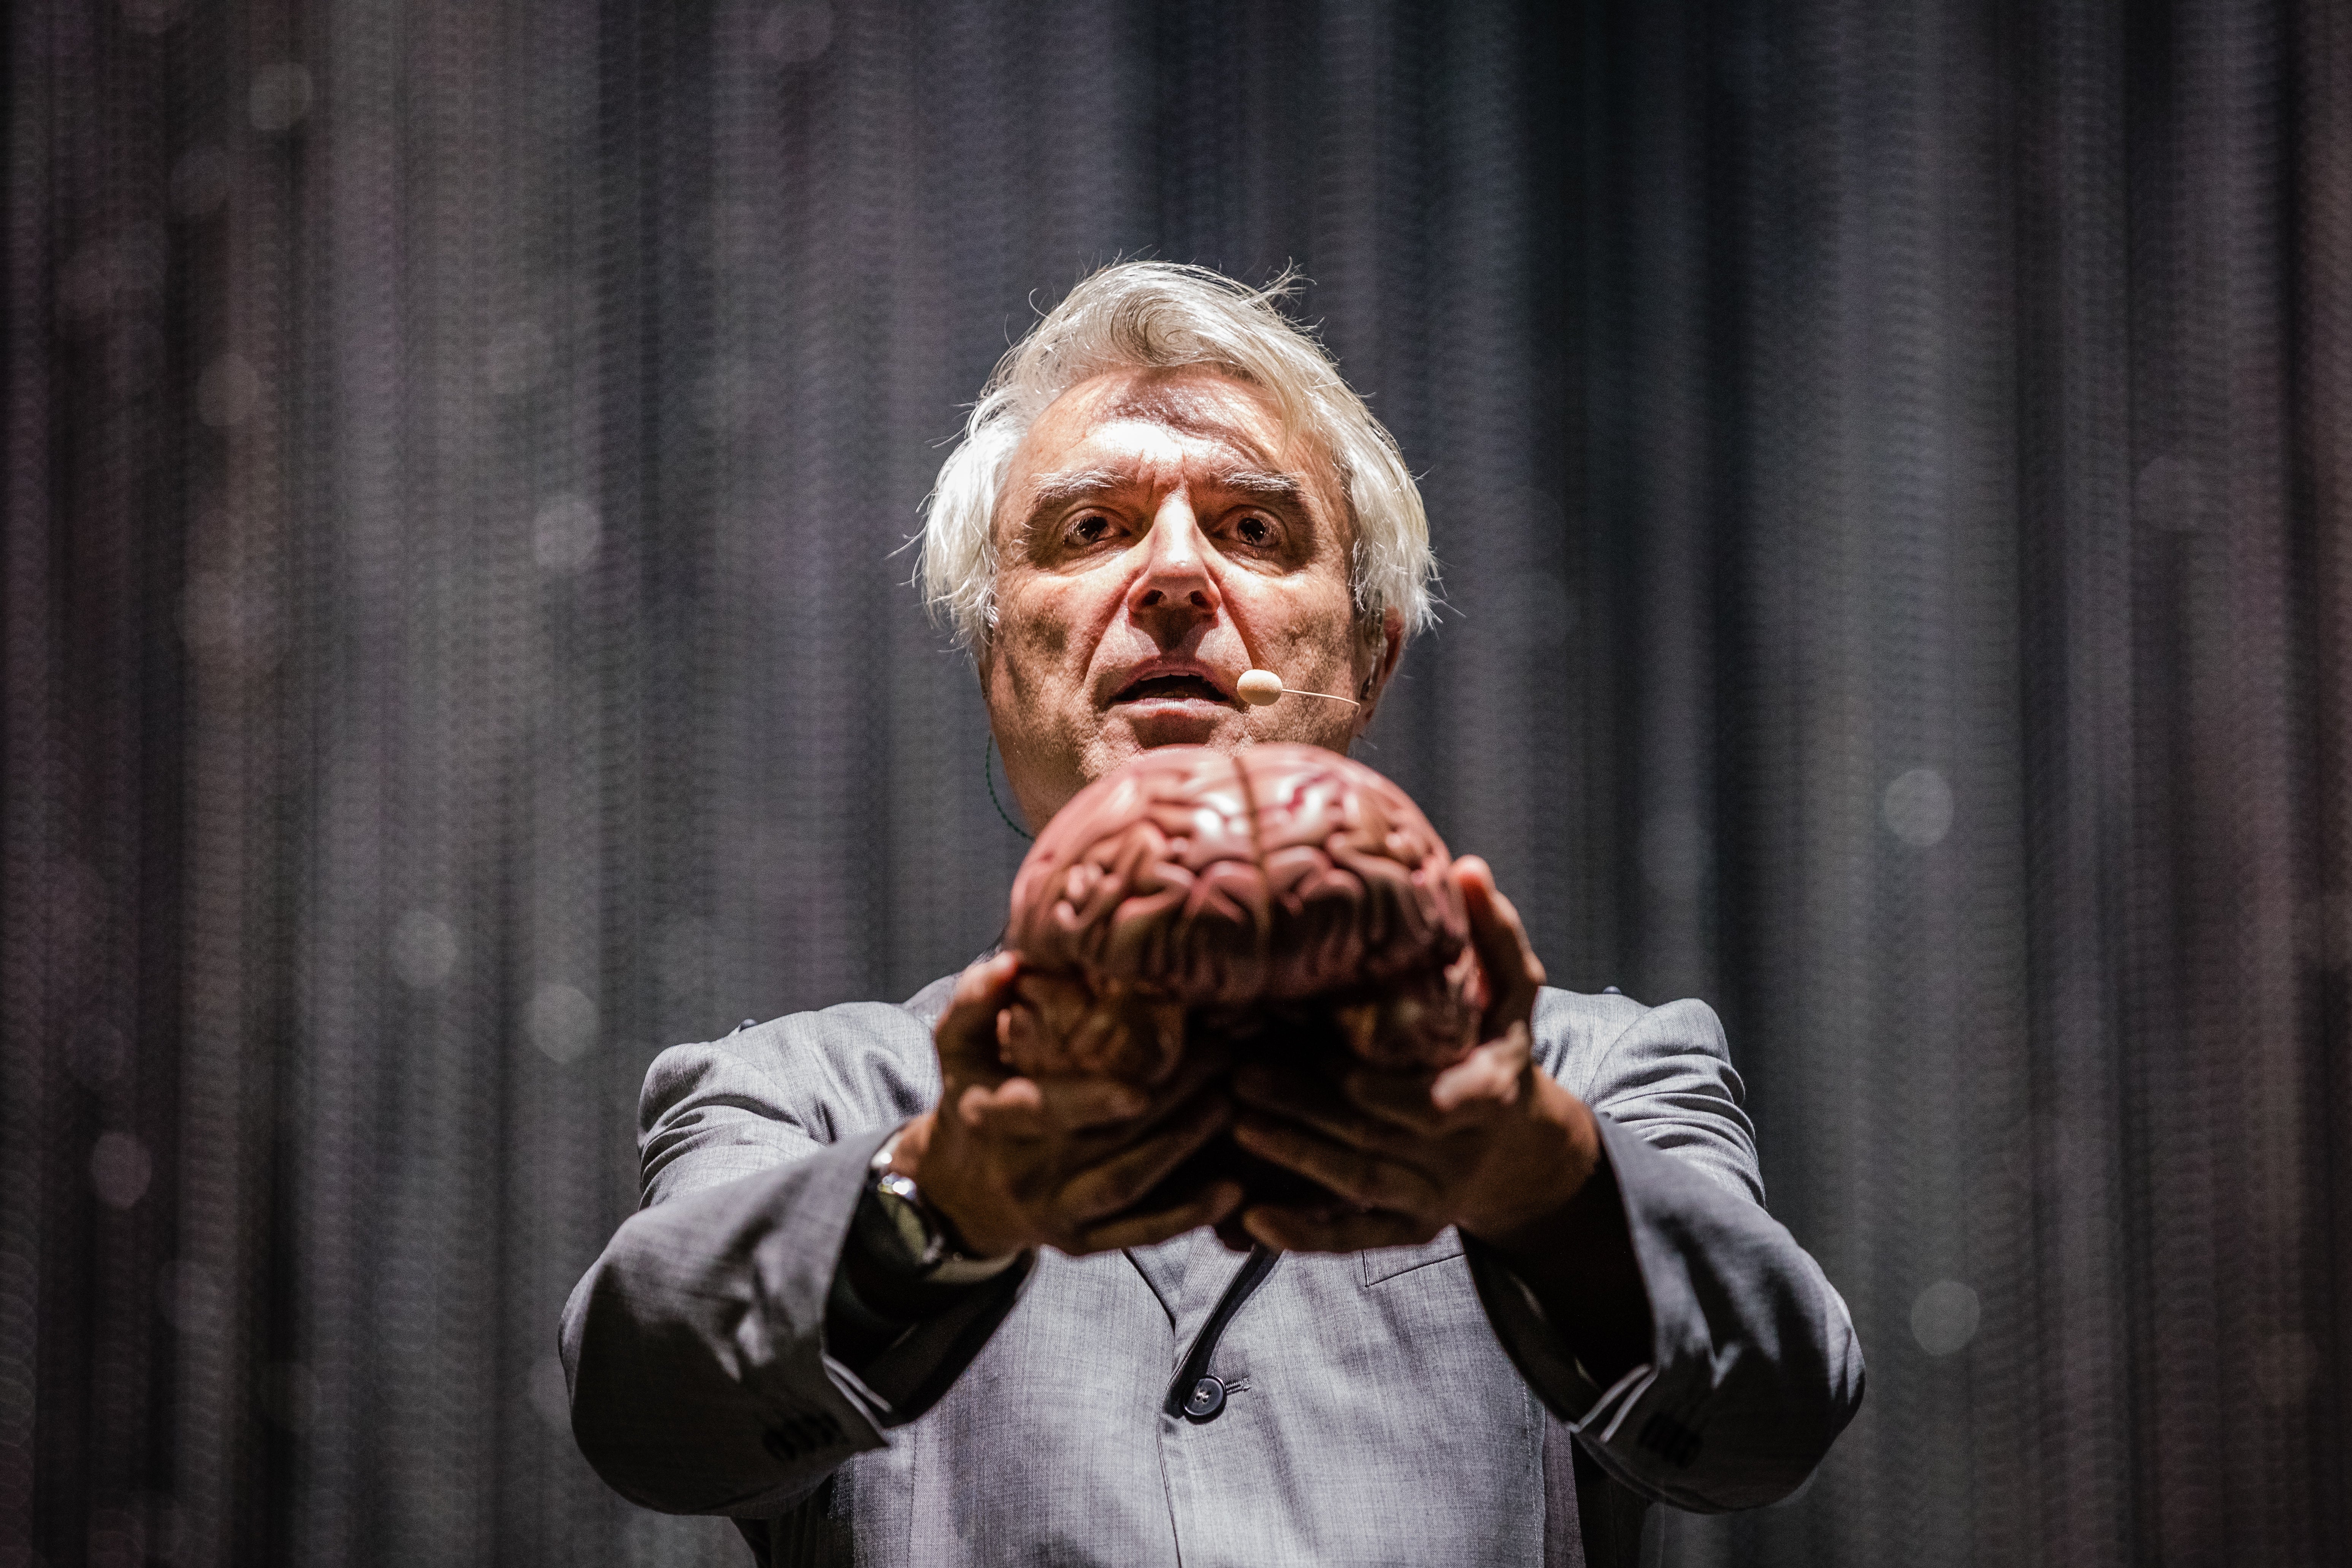 David Byrne performs at Rock Werchter Festival in July 2018